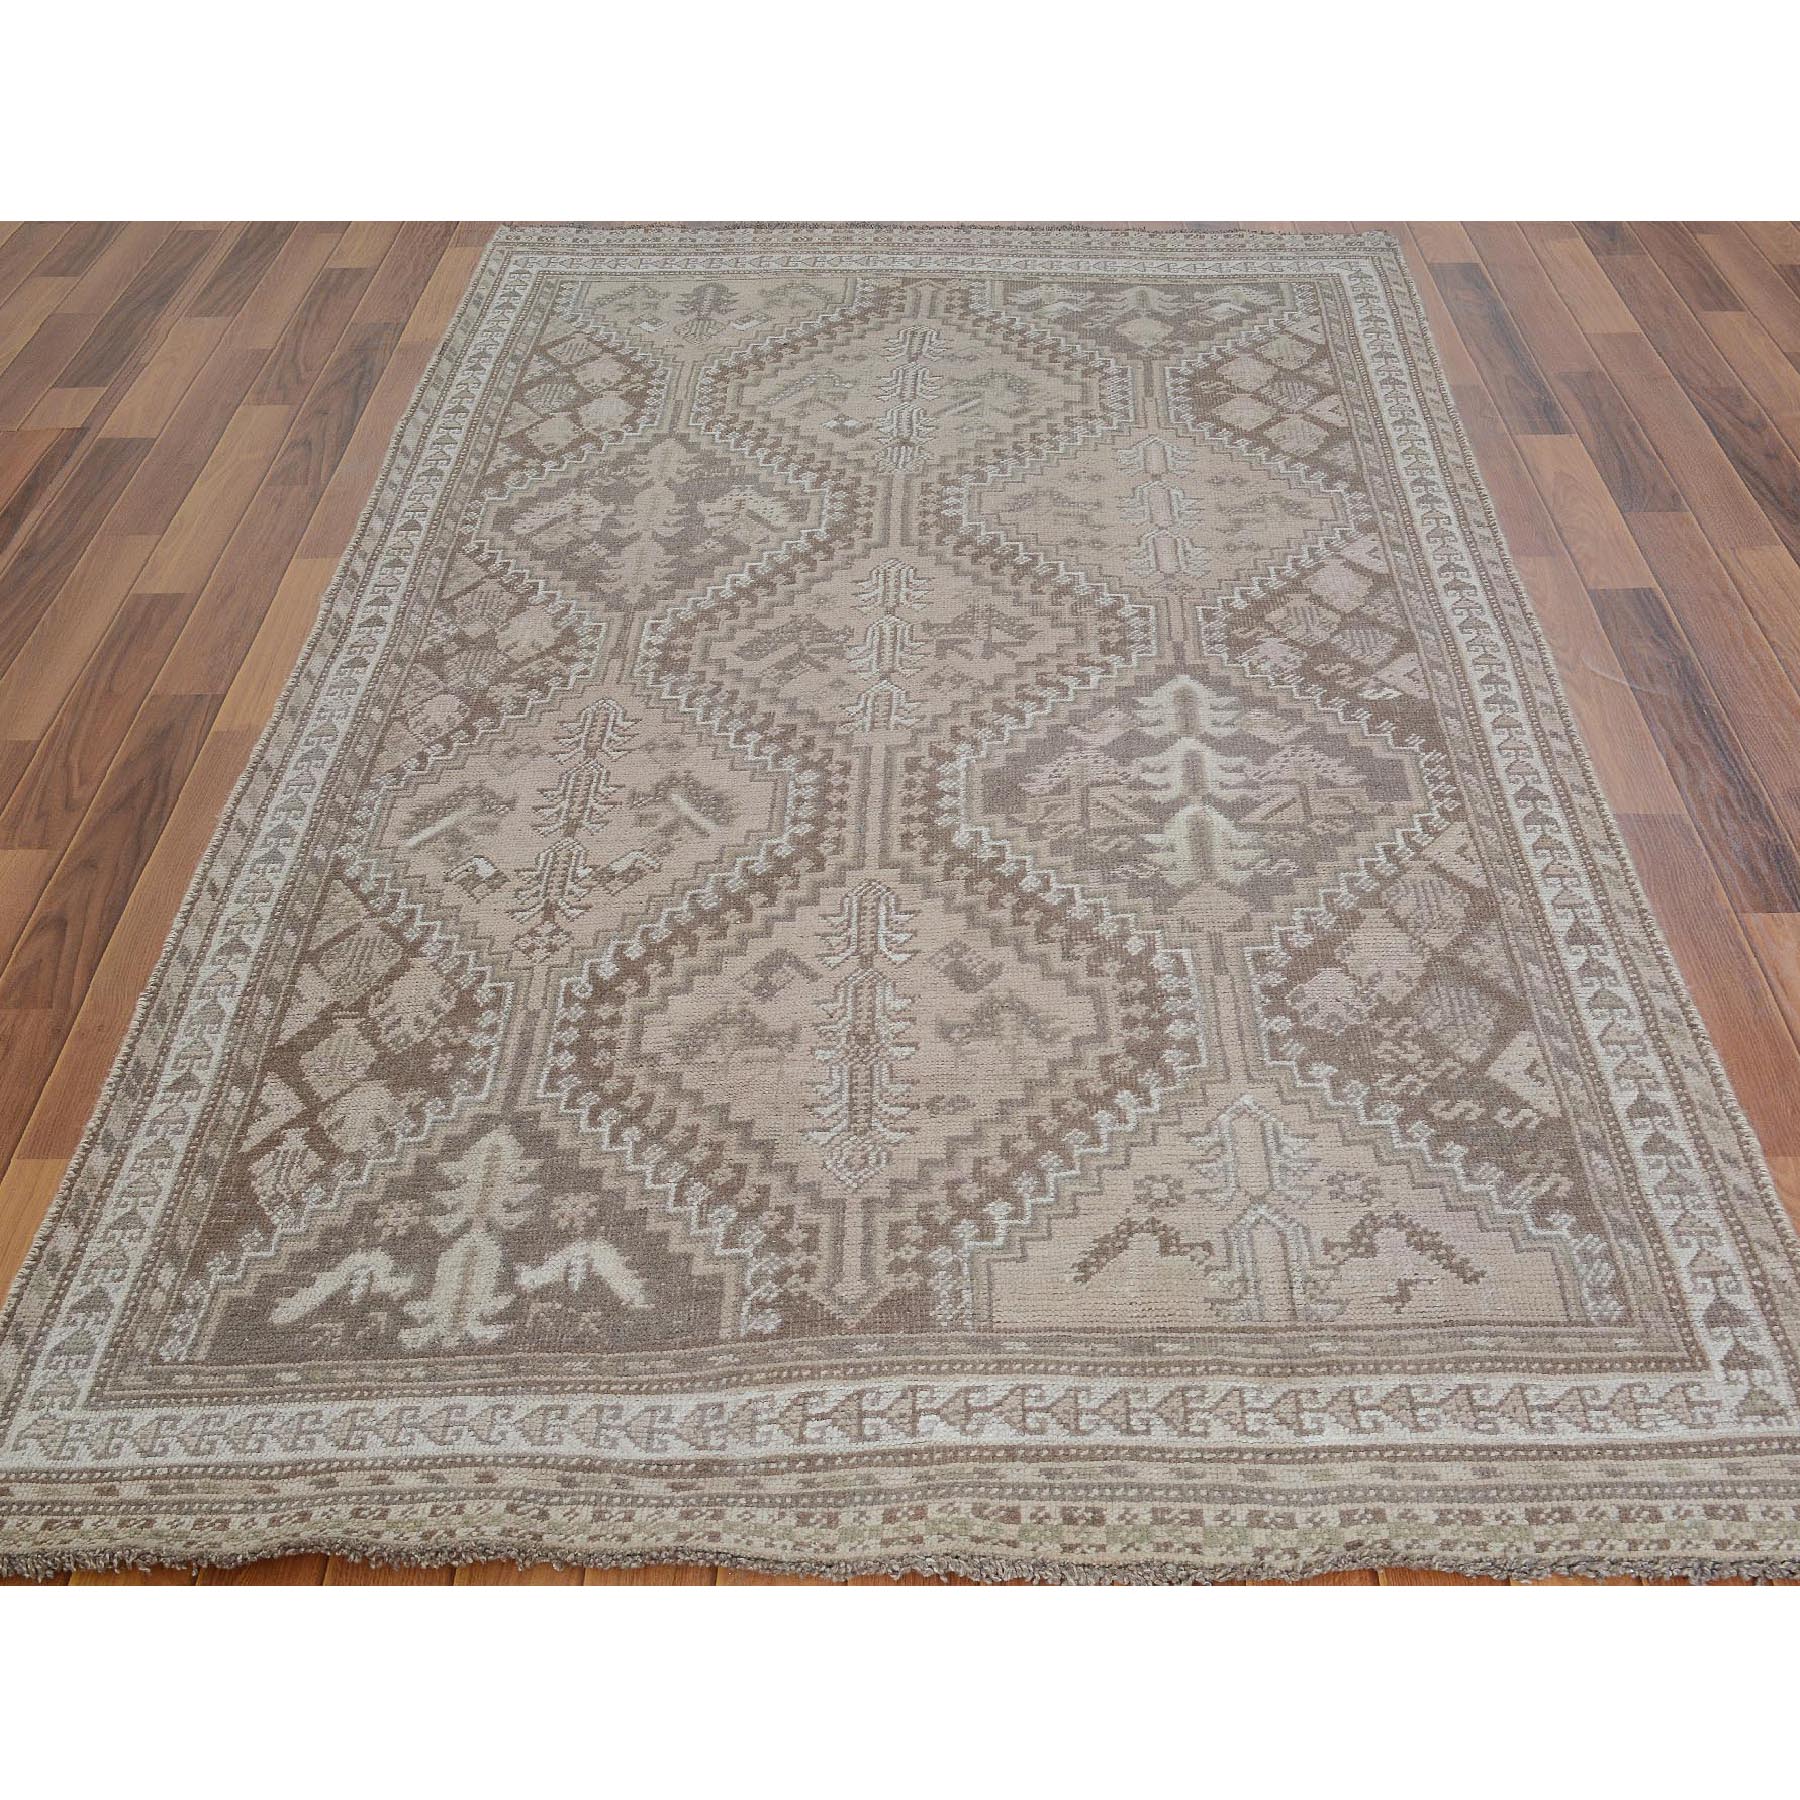 4-9 x8-6  Earth Tone Colors Vintage And Worn Down Persian Qashqai Pure Wool Hand Knotted Oriental Rug 